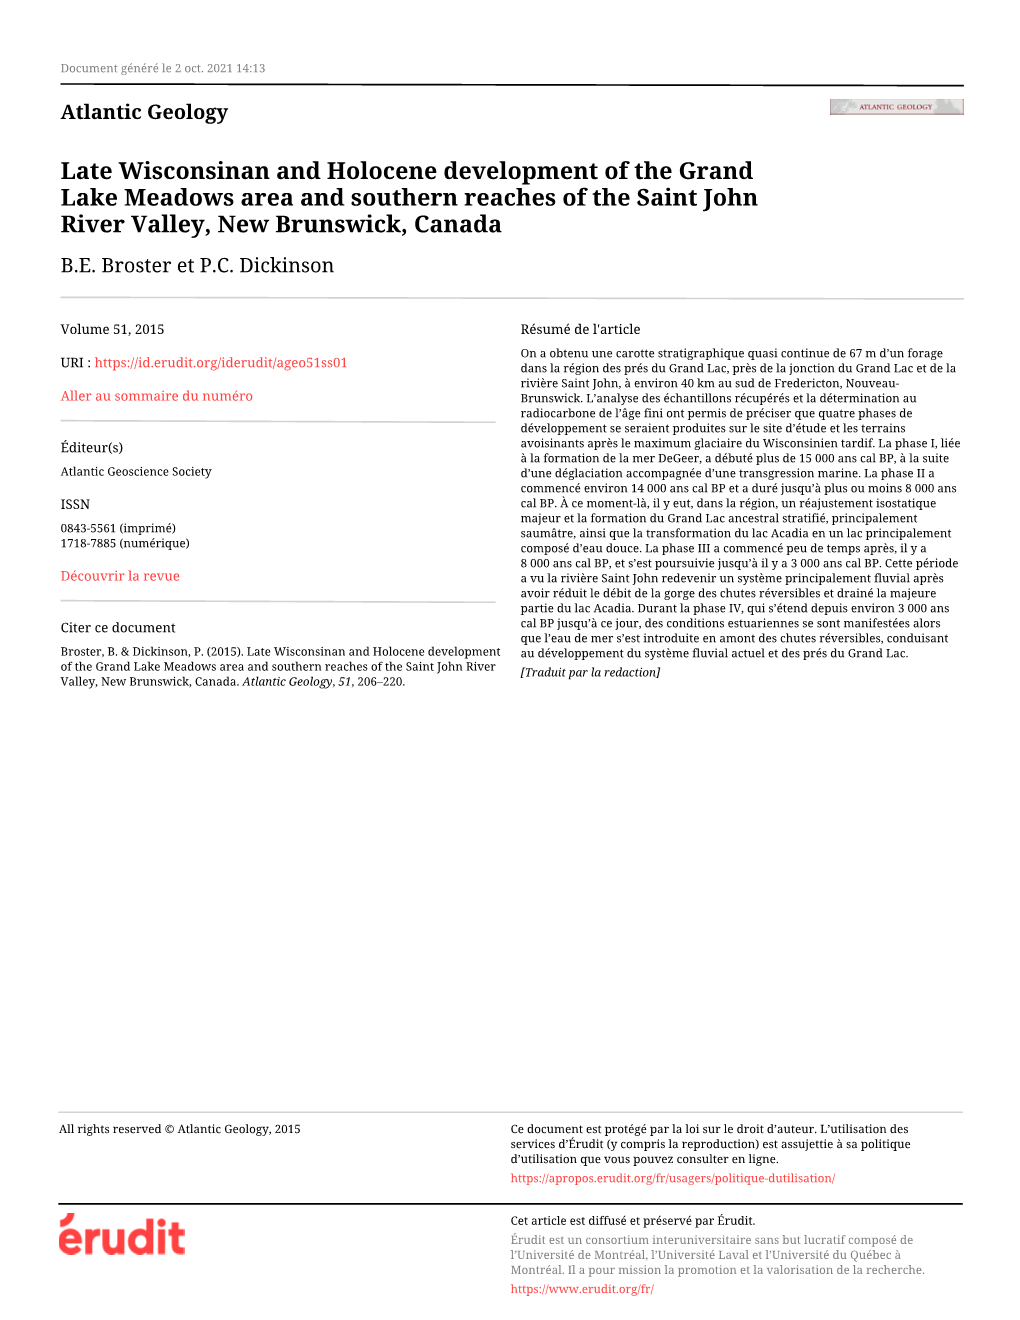 Late Wisconsinan and Holocene Development of the Grand Lake Meadows Area and Southern Reaches of the Saint John River Valley, New Brunswick, Canada B.E